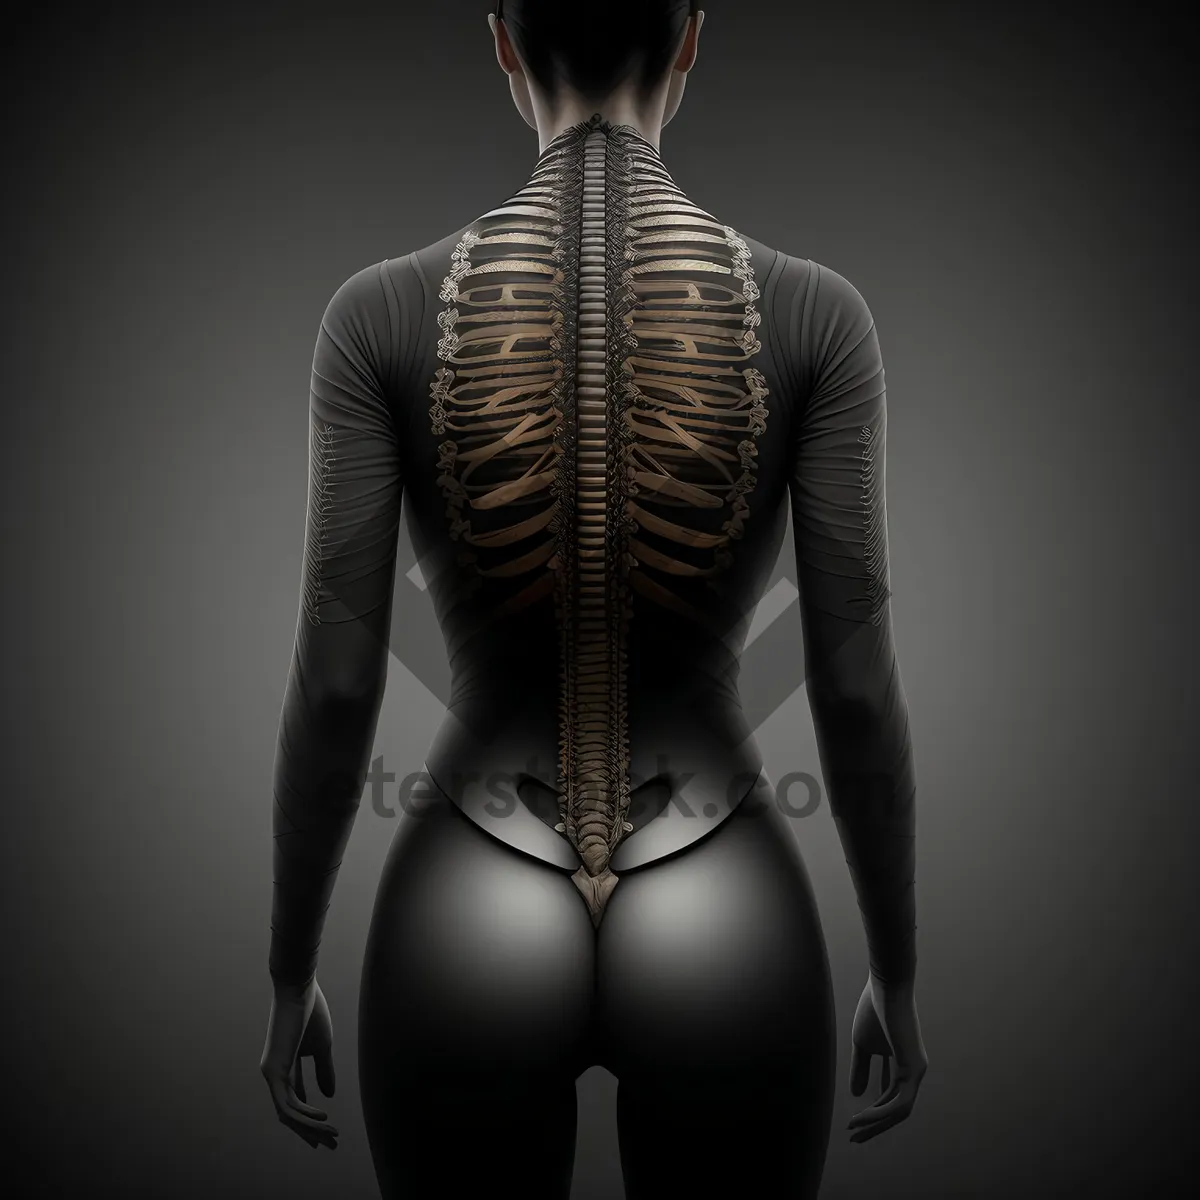 Picture of Anatomical 3D Skeleton X-Ray - Human Body Science